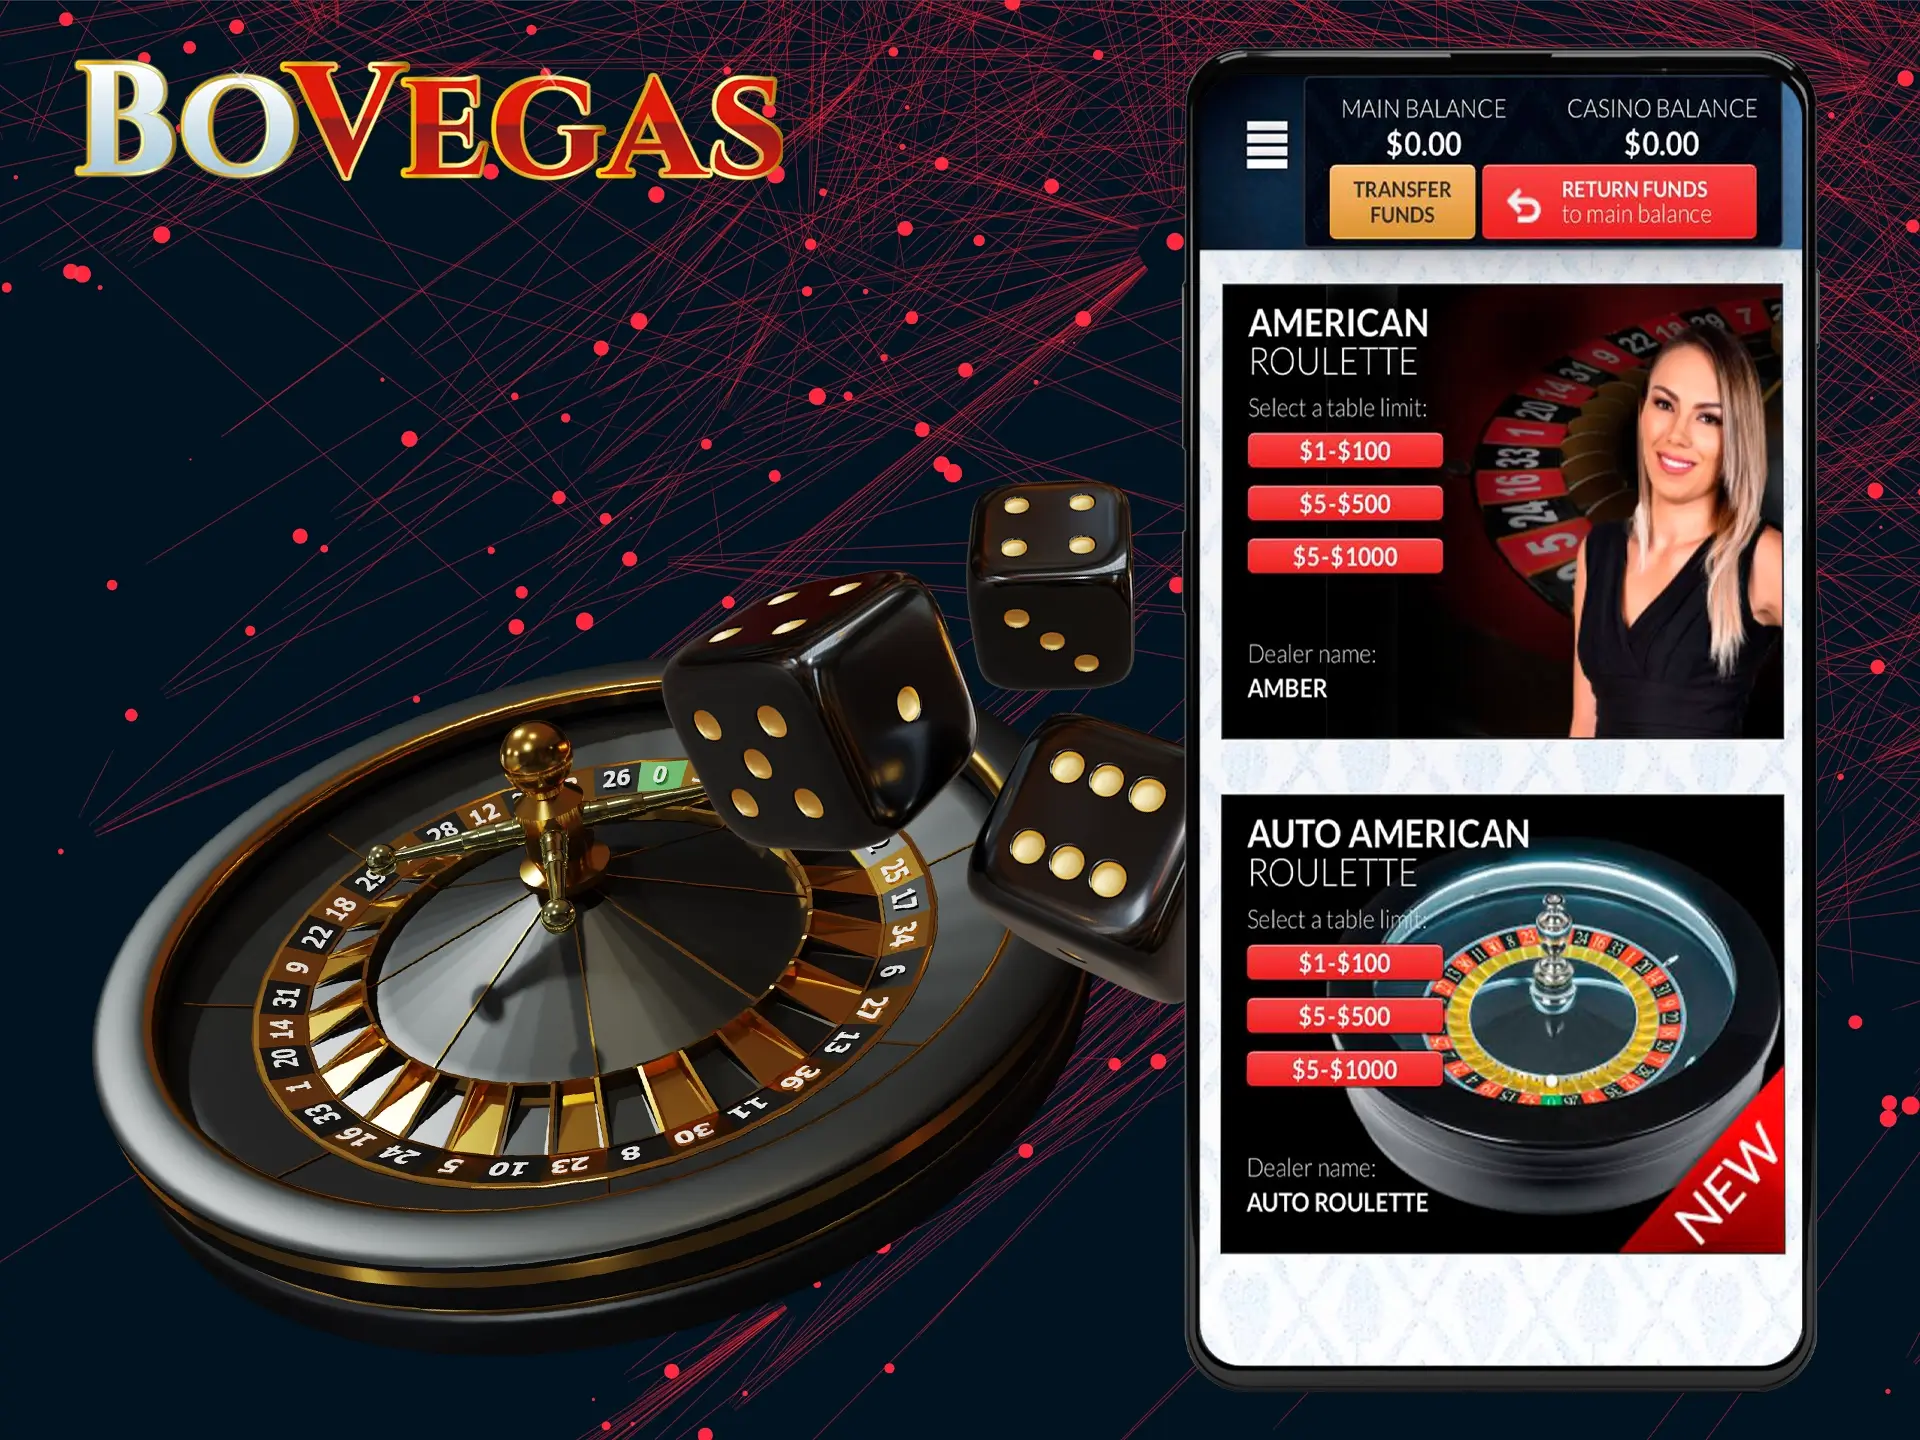 If you prefer games with live dealers try BoVegas live casino in the mobile version.